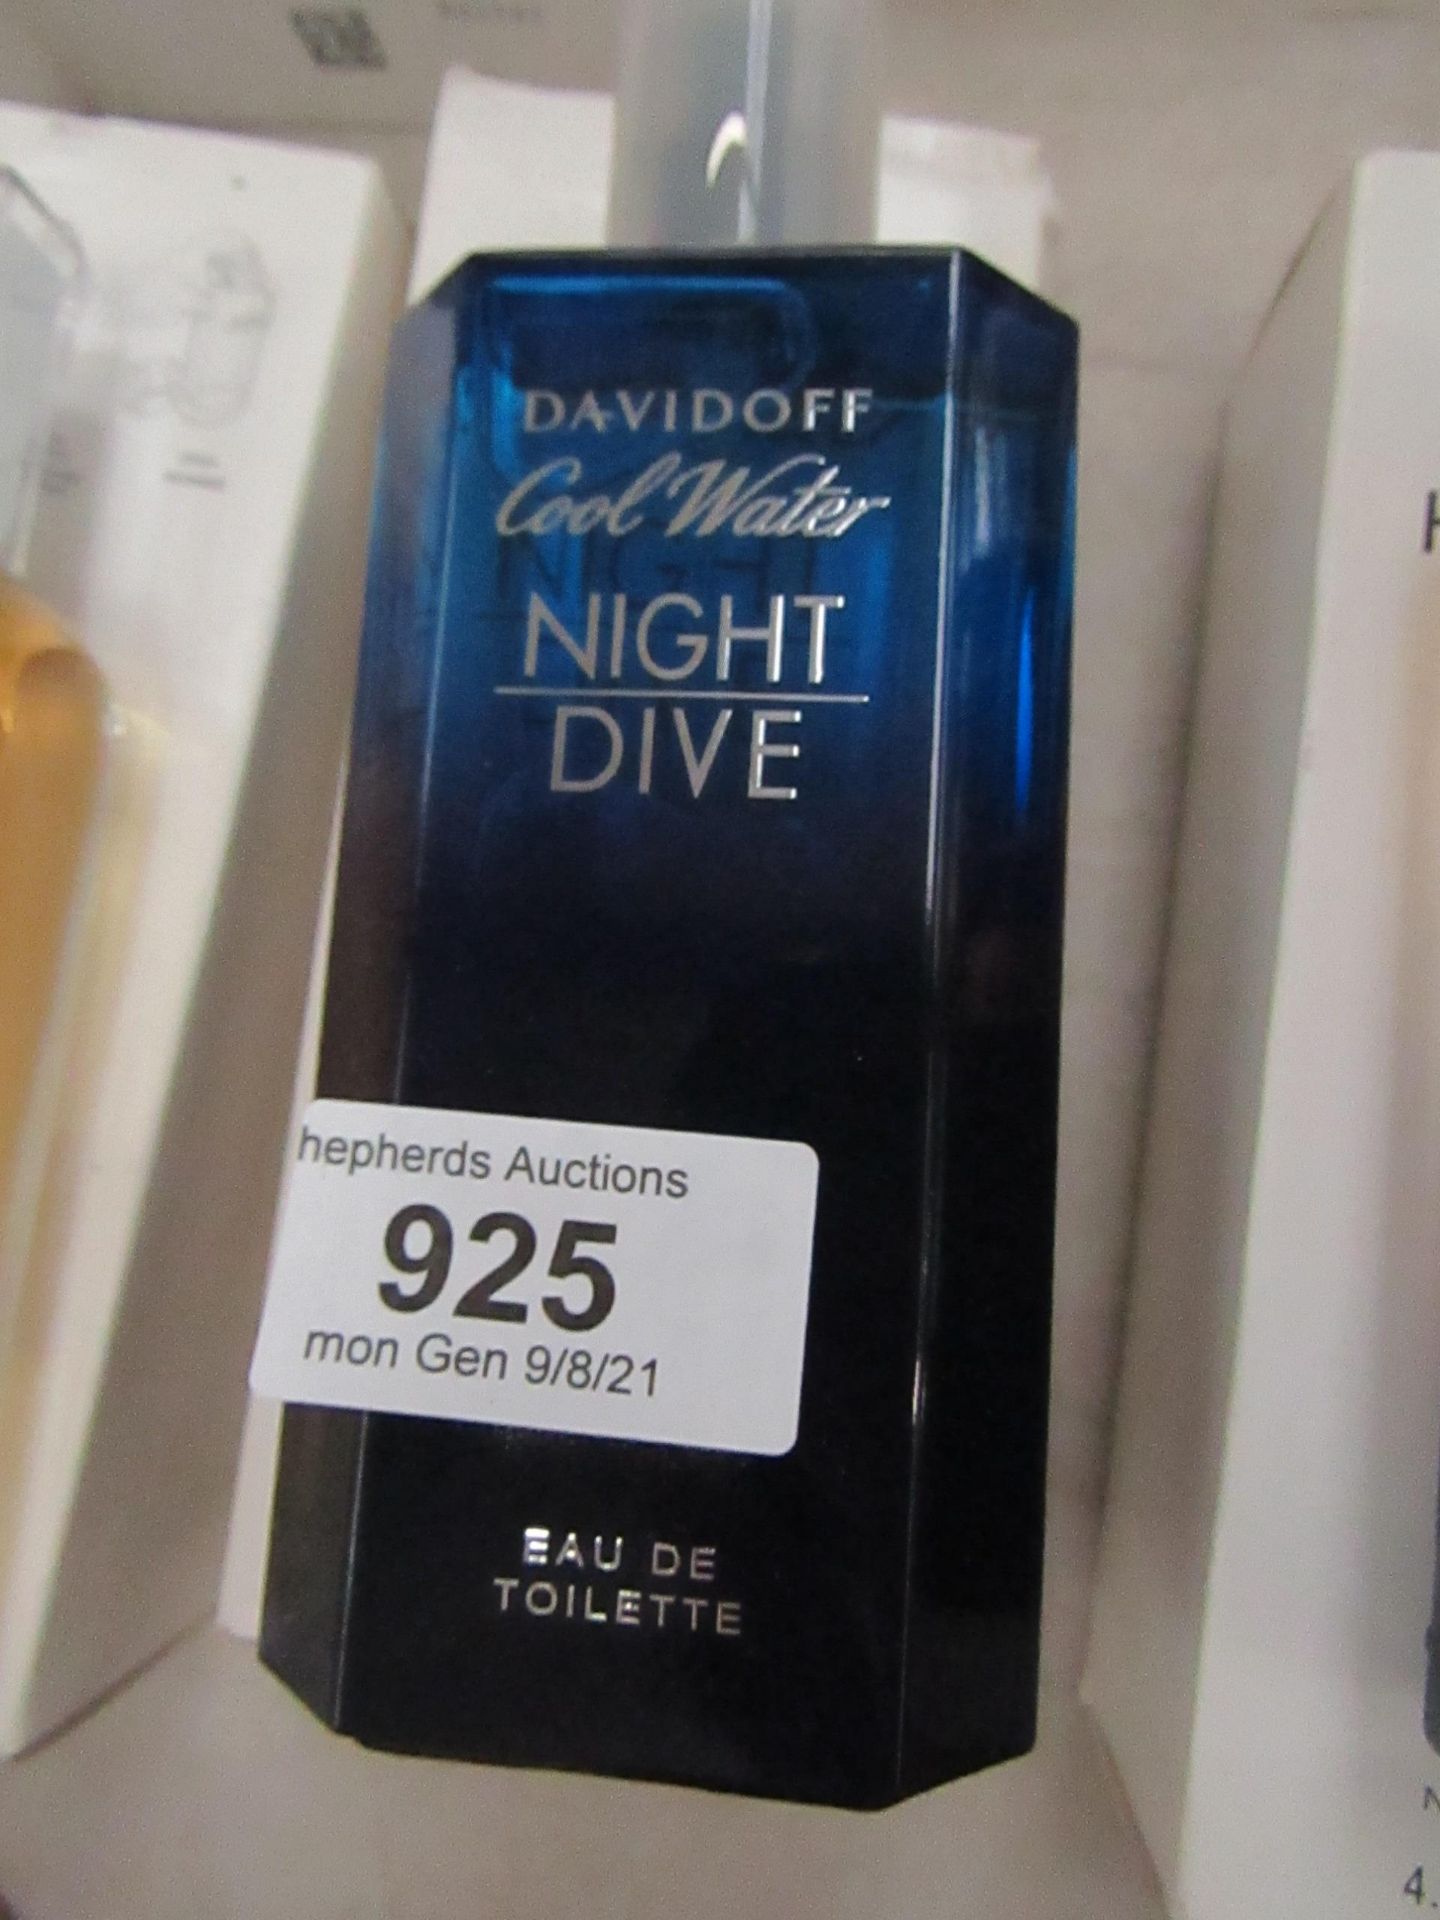 125ml Bottle of Davidoff cool water night dive, Looks to be full